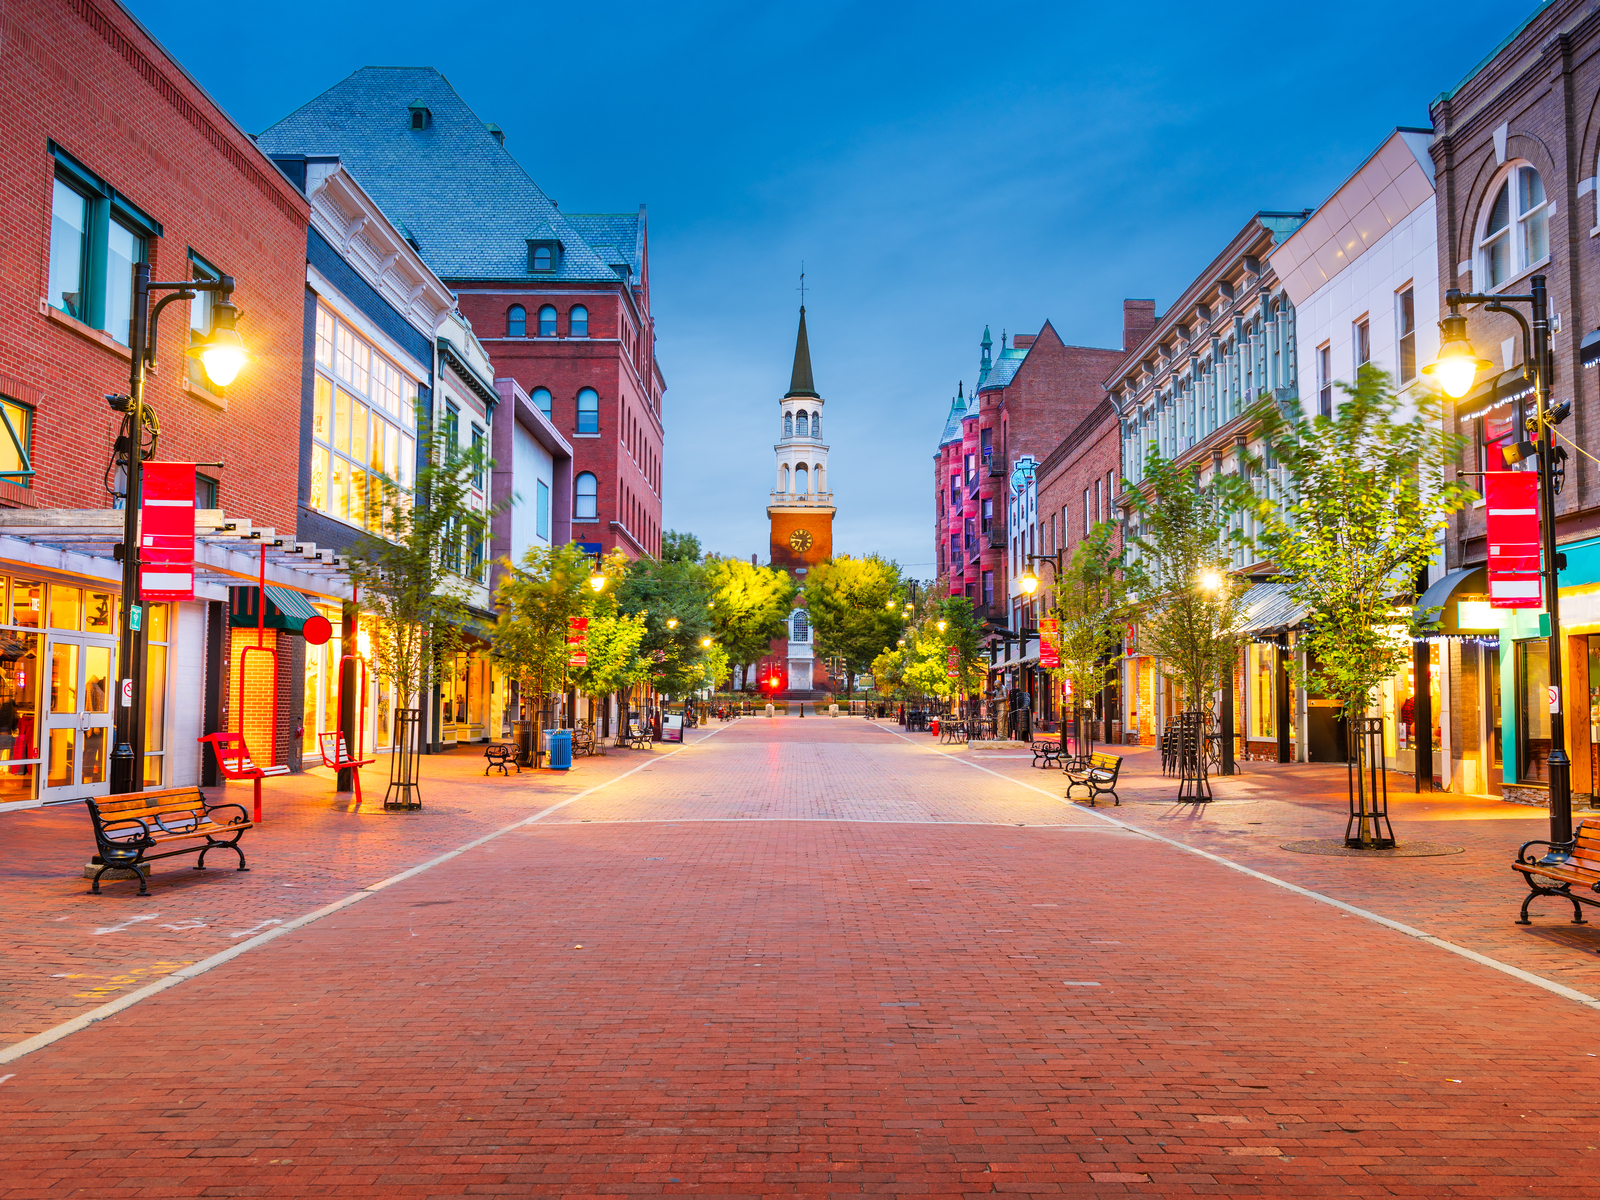 Church Street Marketplace in Burlington, one of the best things to do in Vermont